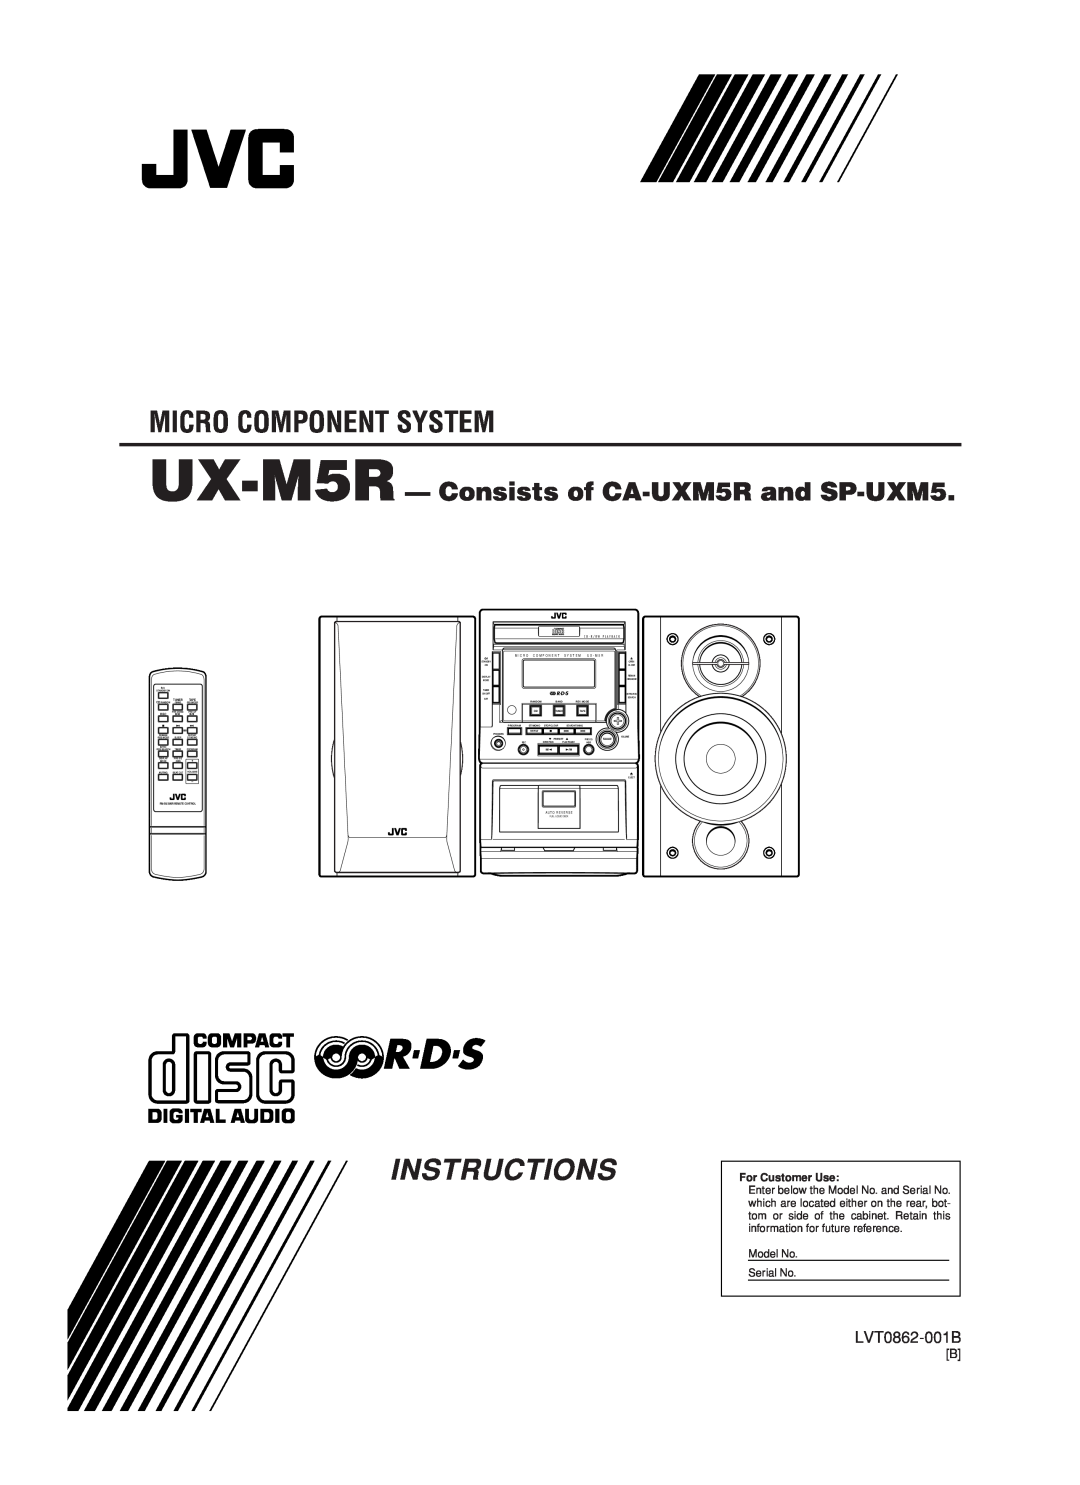 JVC LVT0862-001B manual Micro Component System, Instructions, UX-M5R - Consists of CA-UXM5Rand SP-UXM5, For Customer Use 